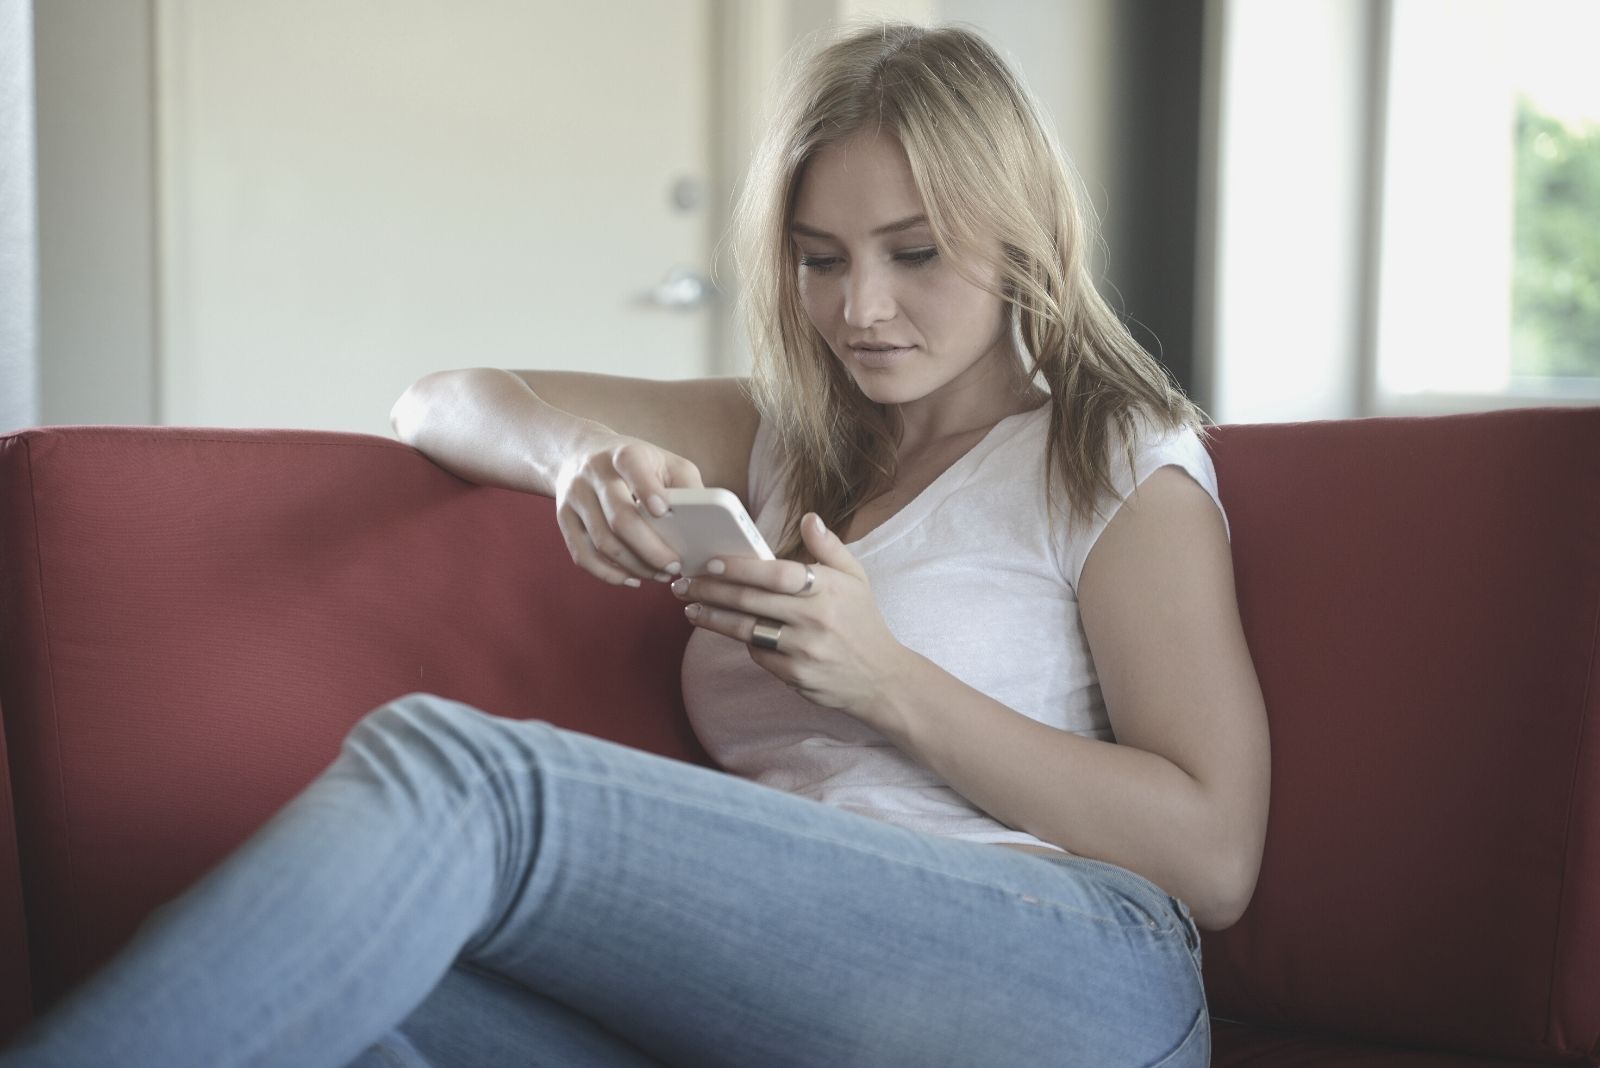 woman looks intently at her phone and relaxing on the red couch inside livingroom